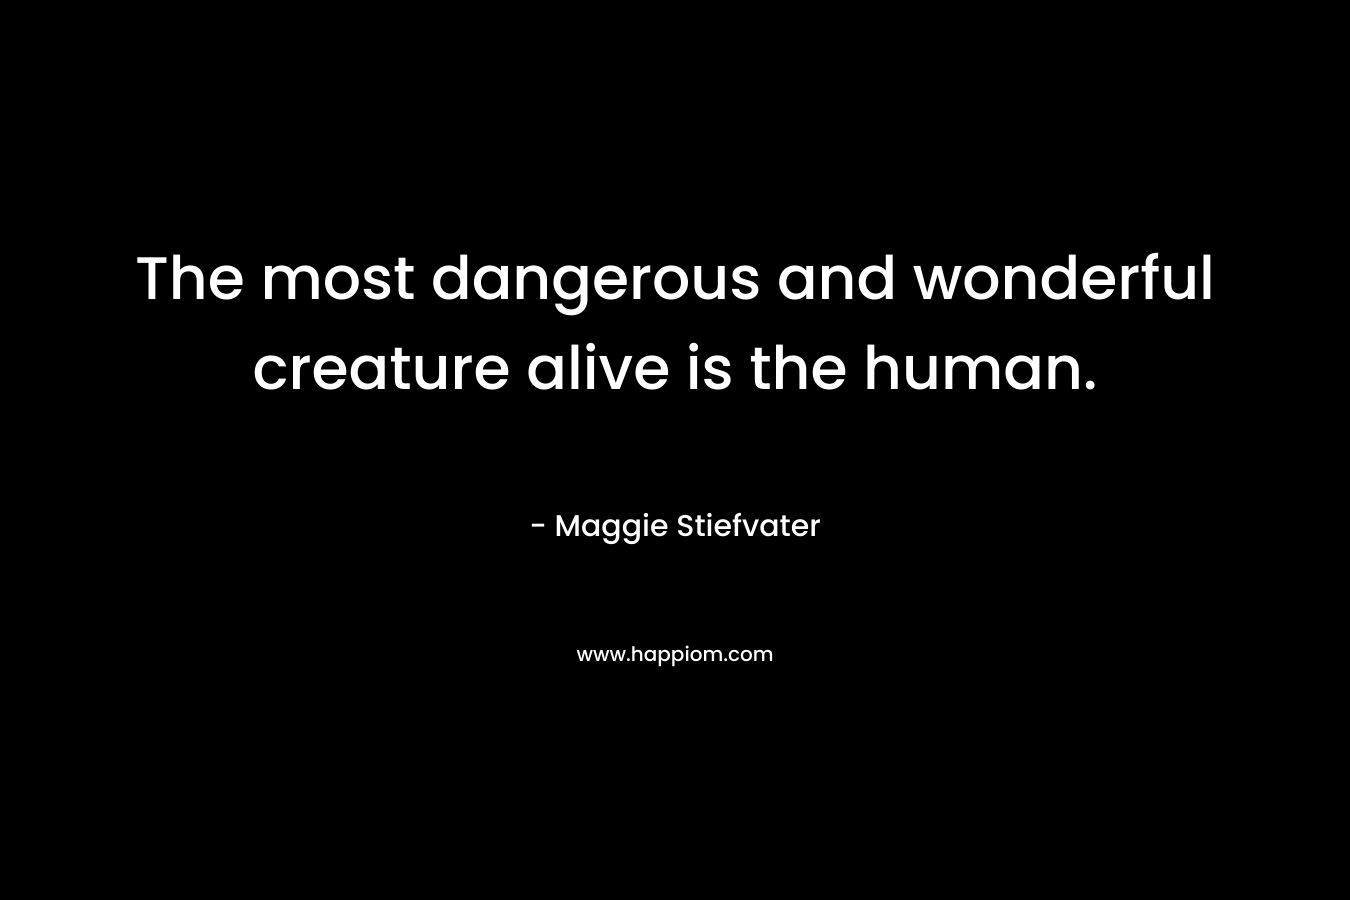 The most dangerous and wonderful creature alive is the human. – Maggie Stiefvater